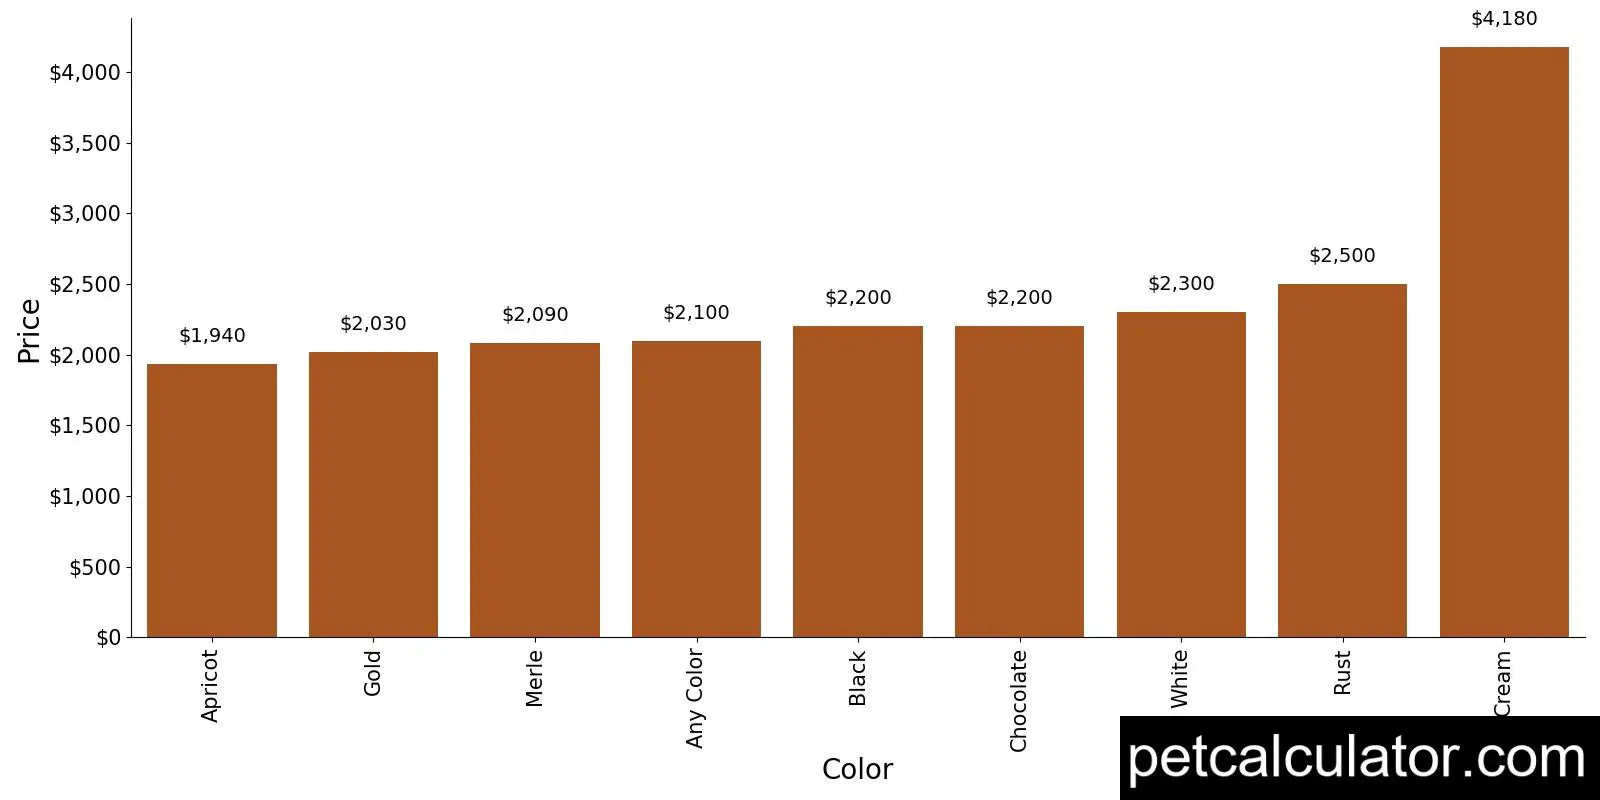 Price of Miniature Golden Retriever by Color 